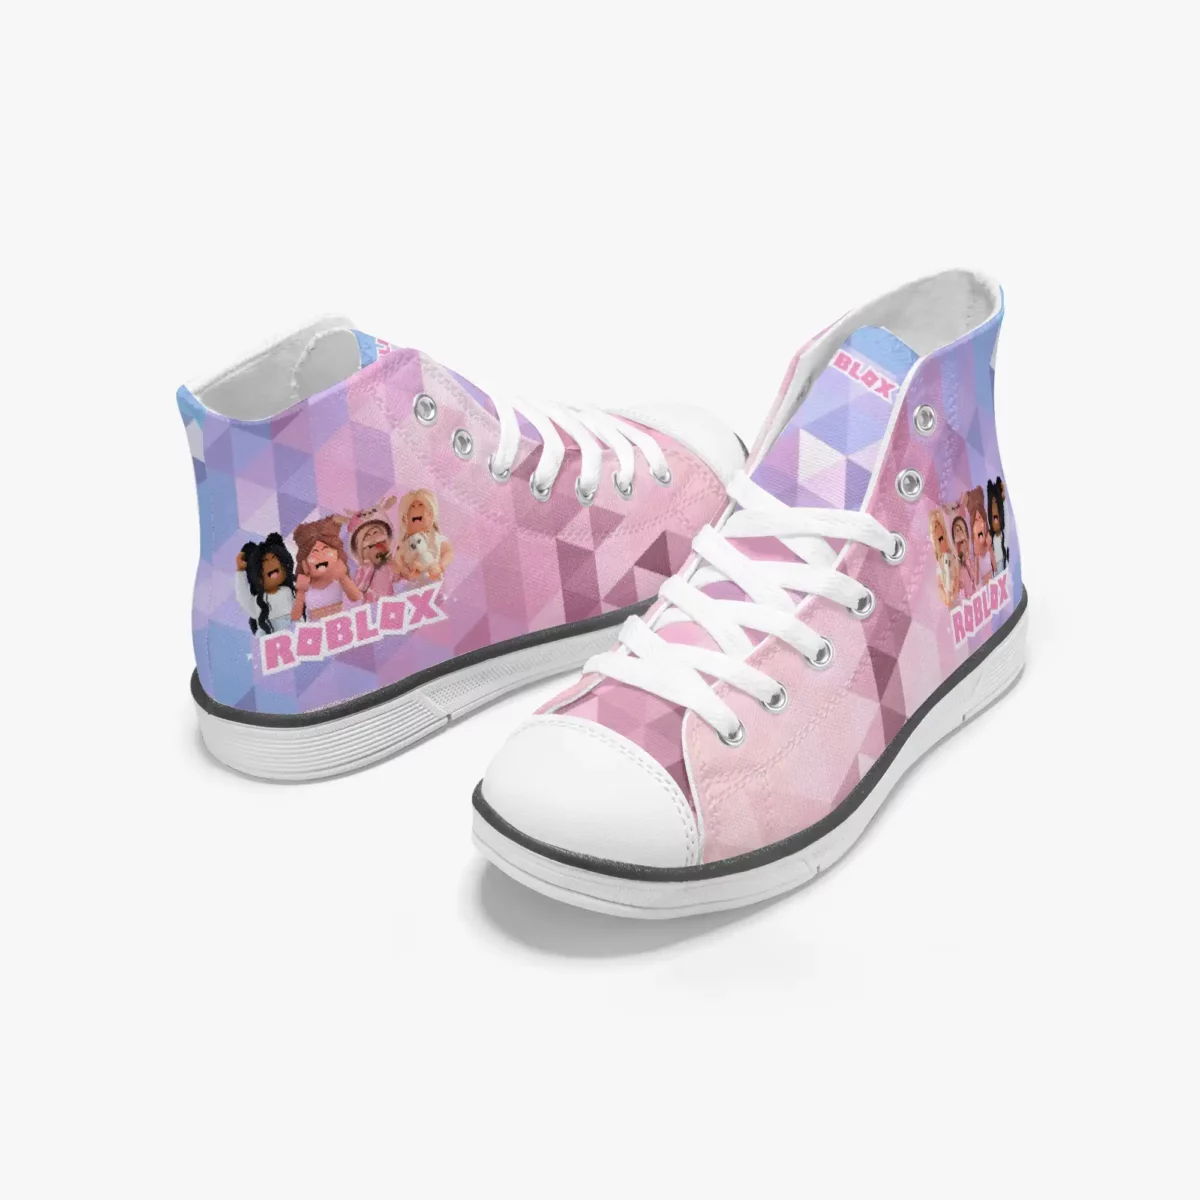 Roblox Girls Personalized High-Top Sneakers for Children – Pink and Purple geometric background Cool Kiddo 14